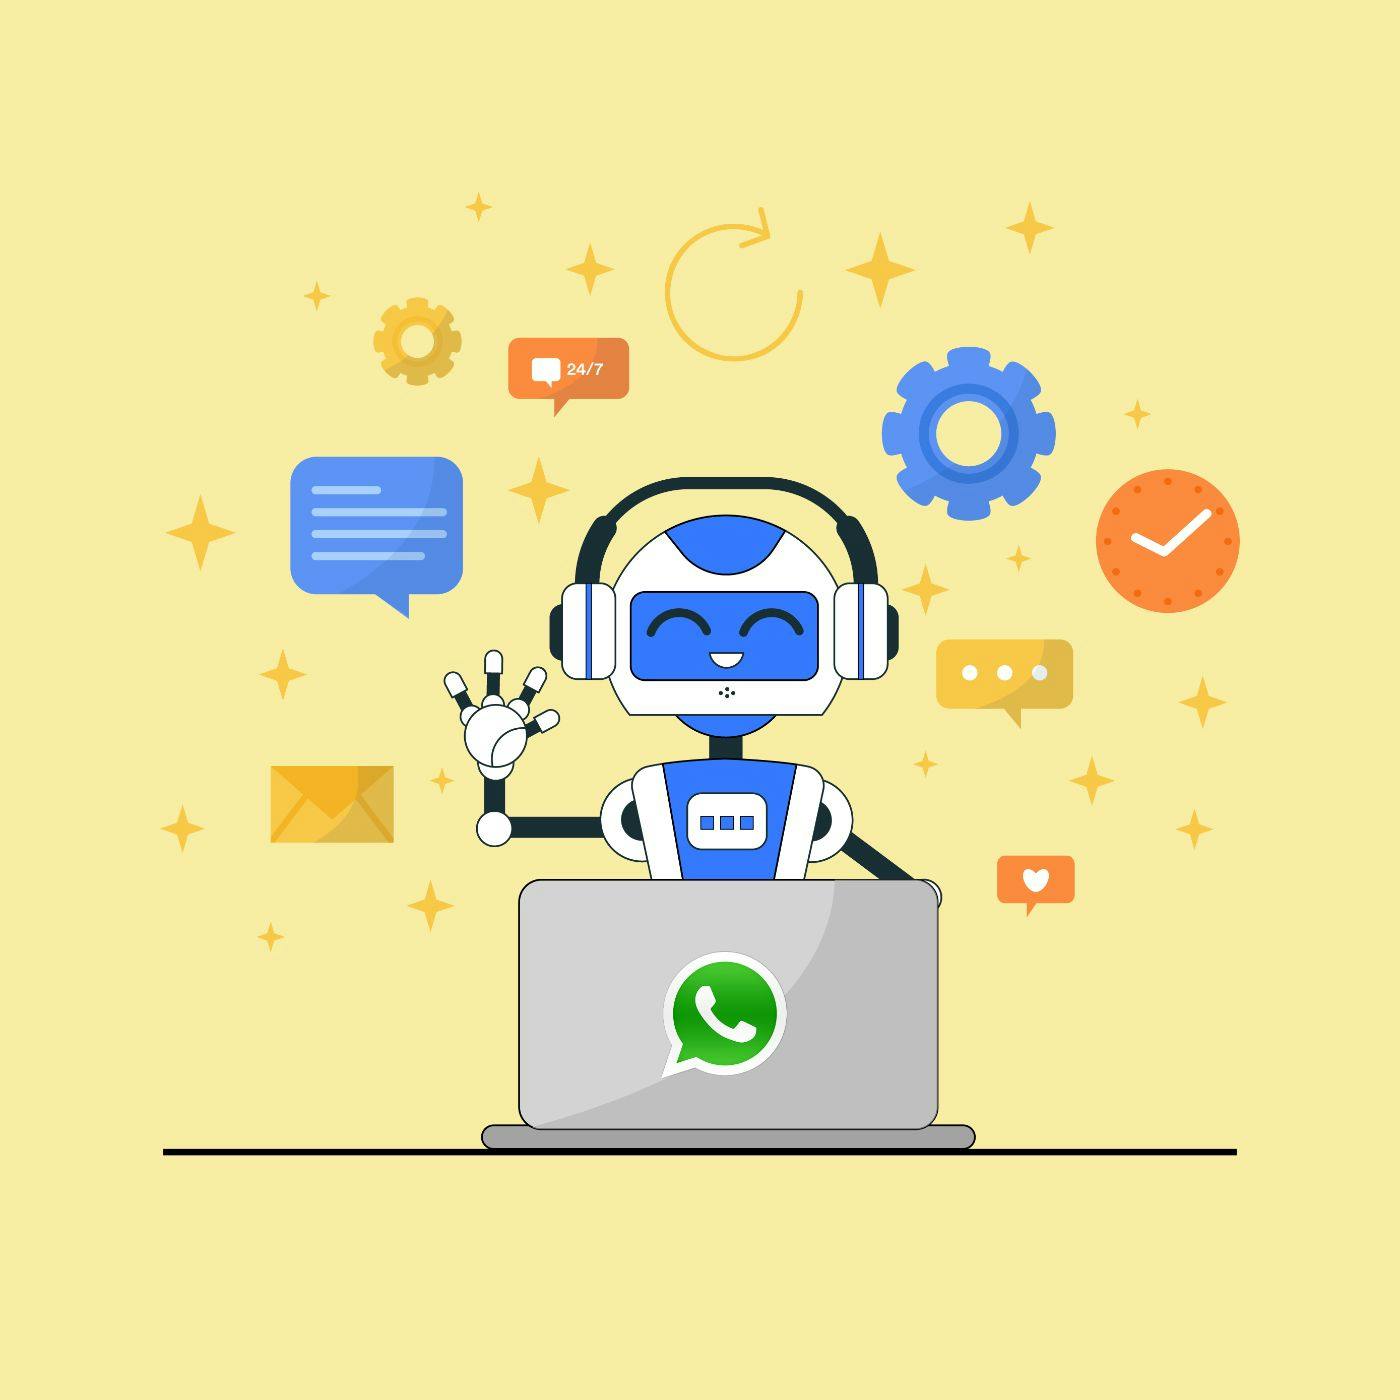 featured image - 8 Ways You Can Use WhatsApp to Improve Customer Service 